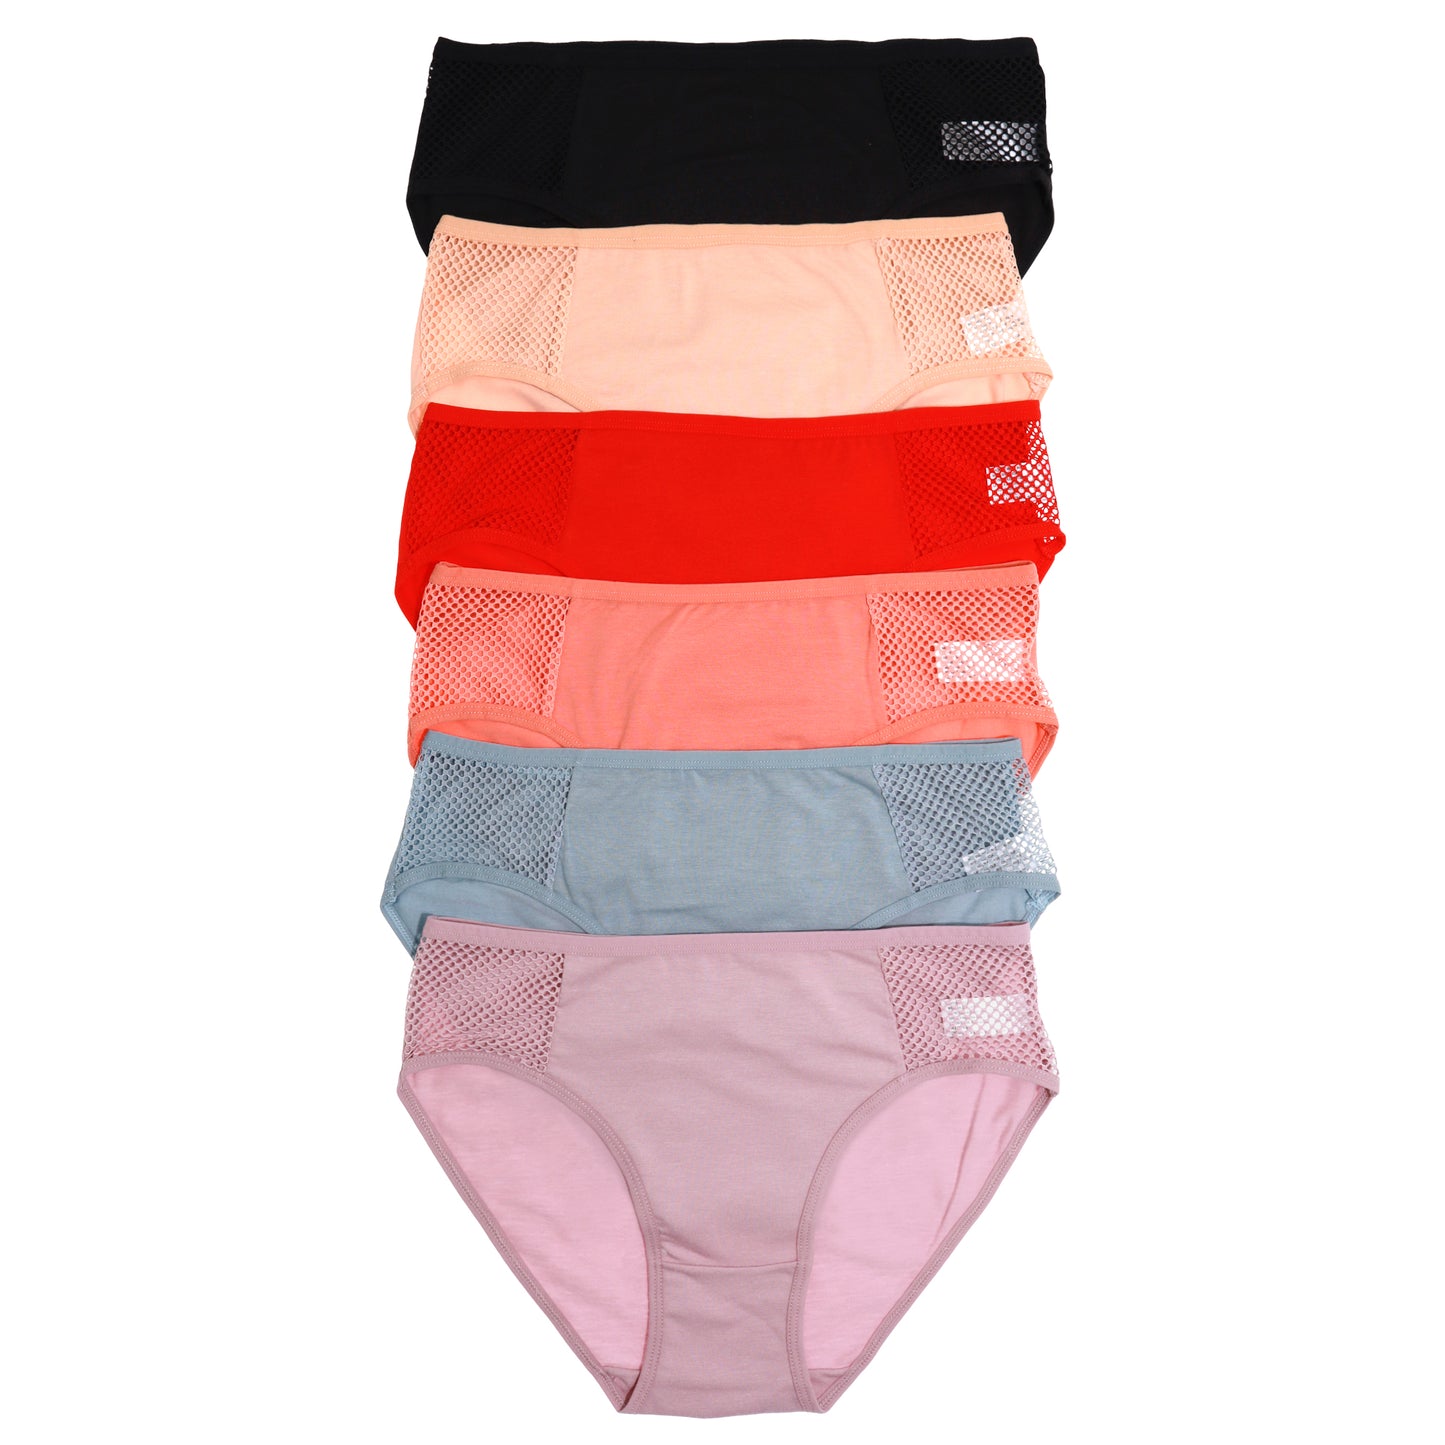 Cotton Bikini Panties with Mesh Accent Detail (6-Pack)